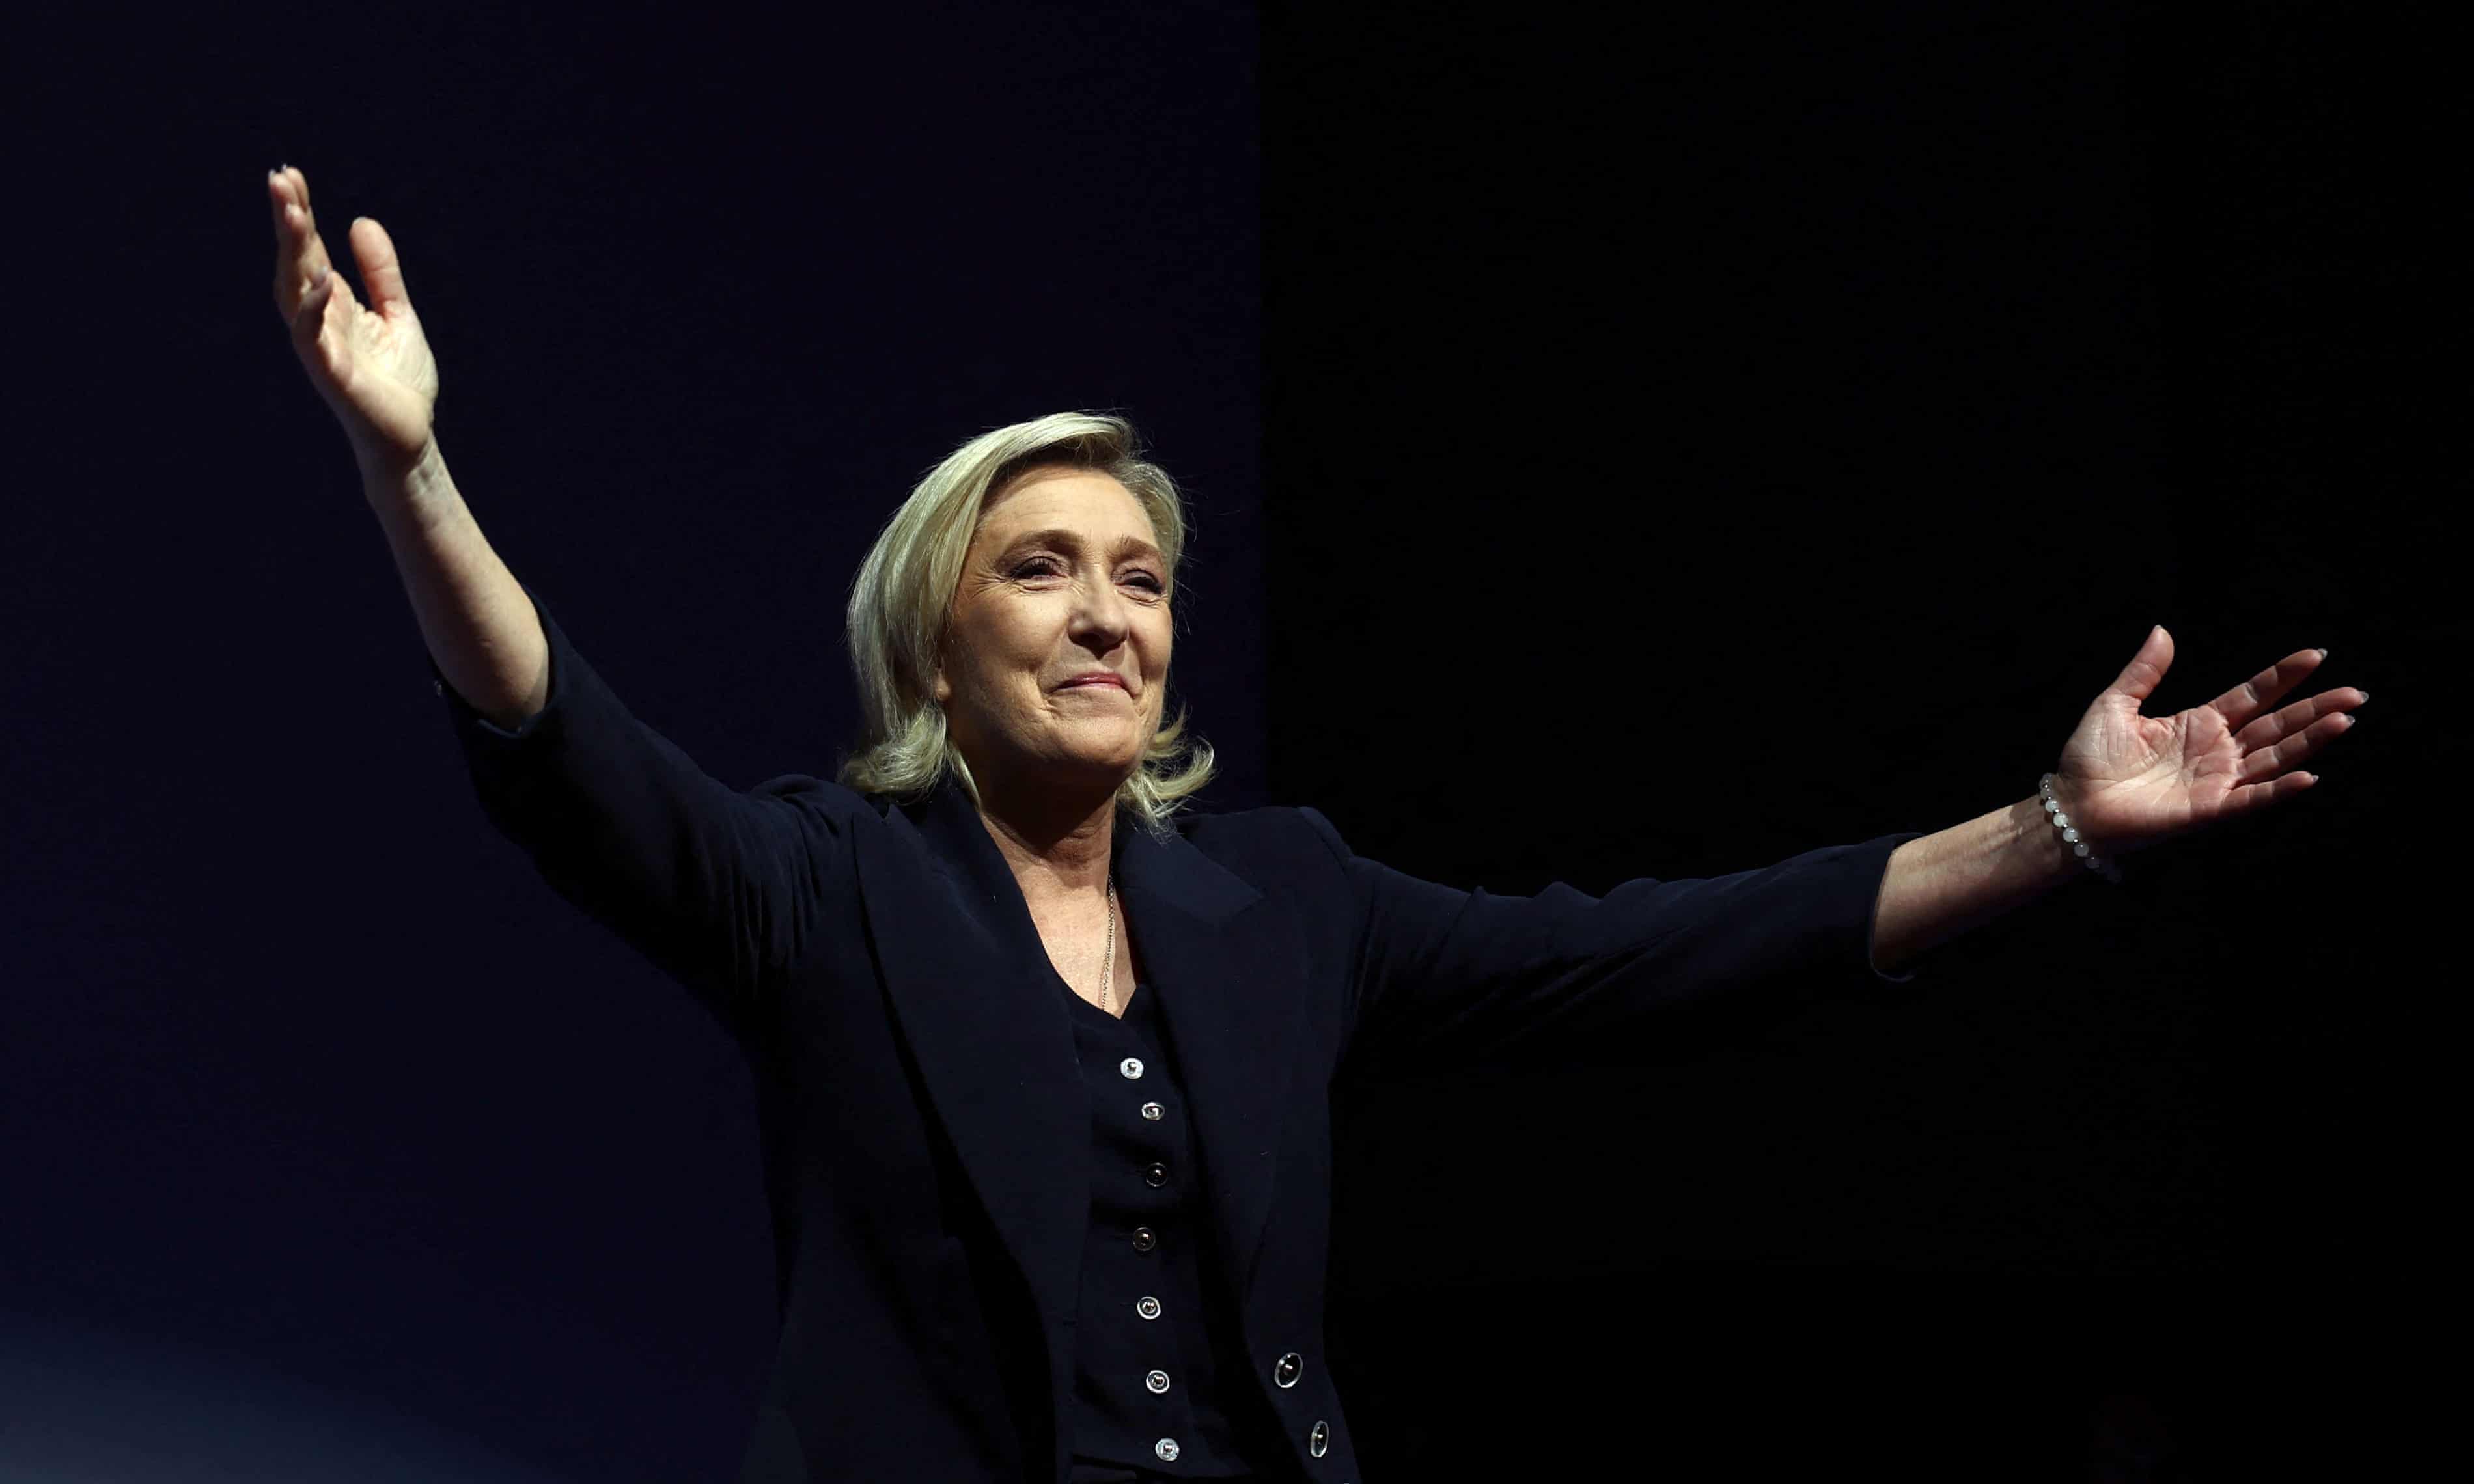 Thousands protest in Paris as exit polls say Marine Le Pen’s far-right fascist coalition is ahead in first round (theguardian.com)